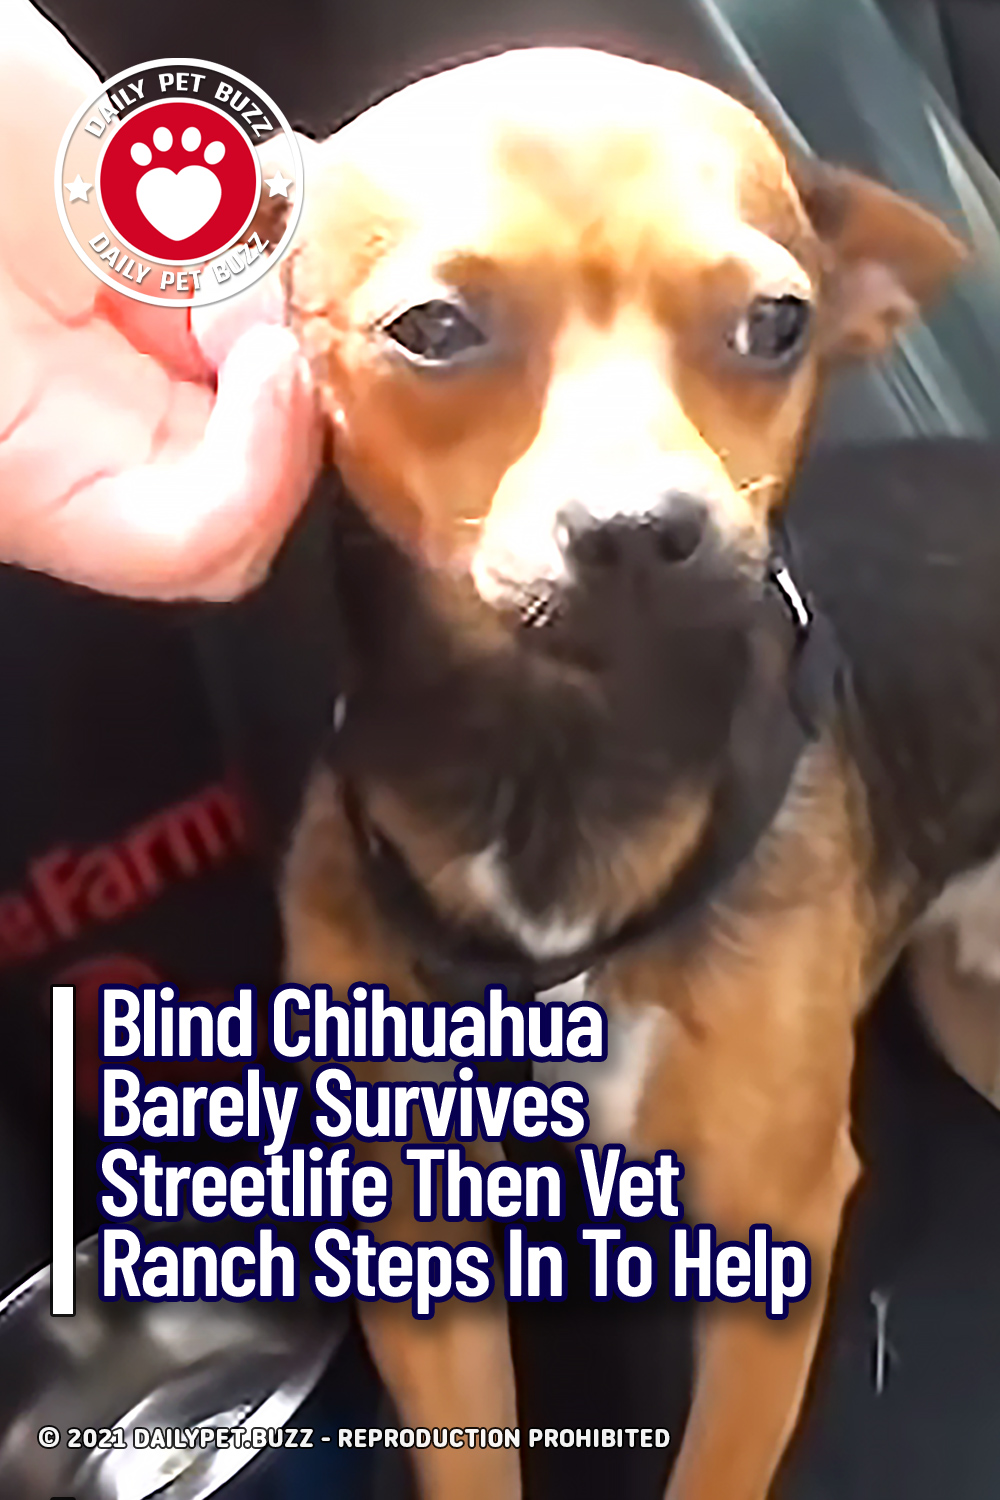 Blind Chihuahua Barely Survives Streetlife Then Vet Ranch Steps In To Help